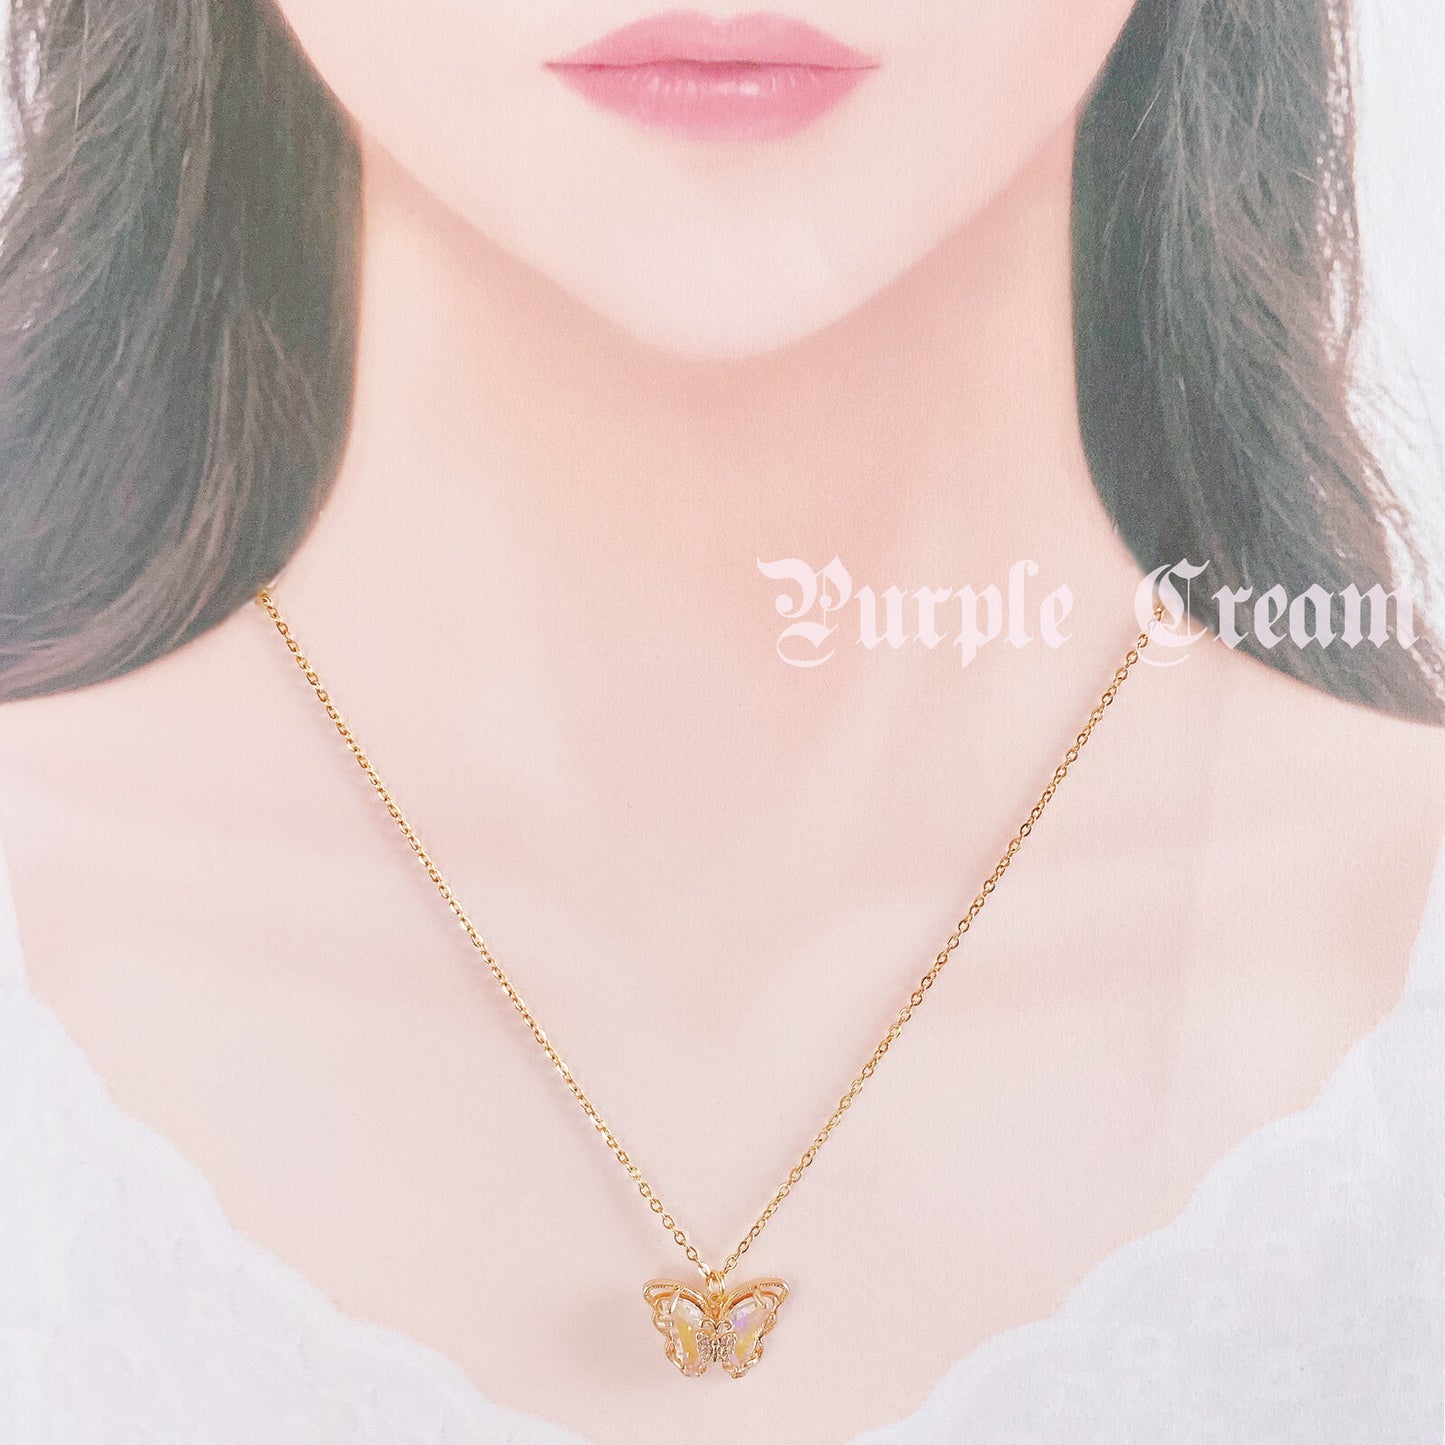 Purple Cream Butterfly Necklace - YOUAREMYPOISON